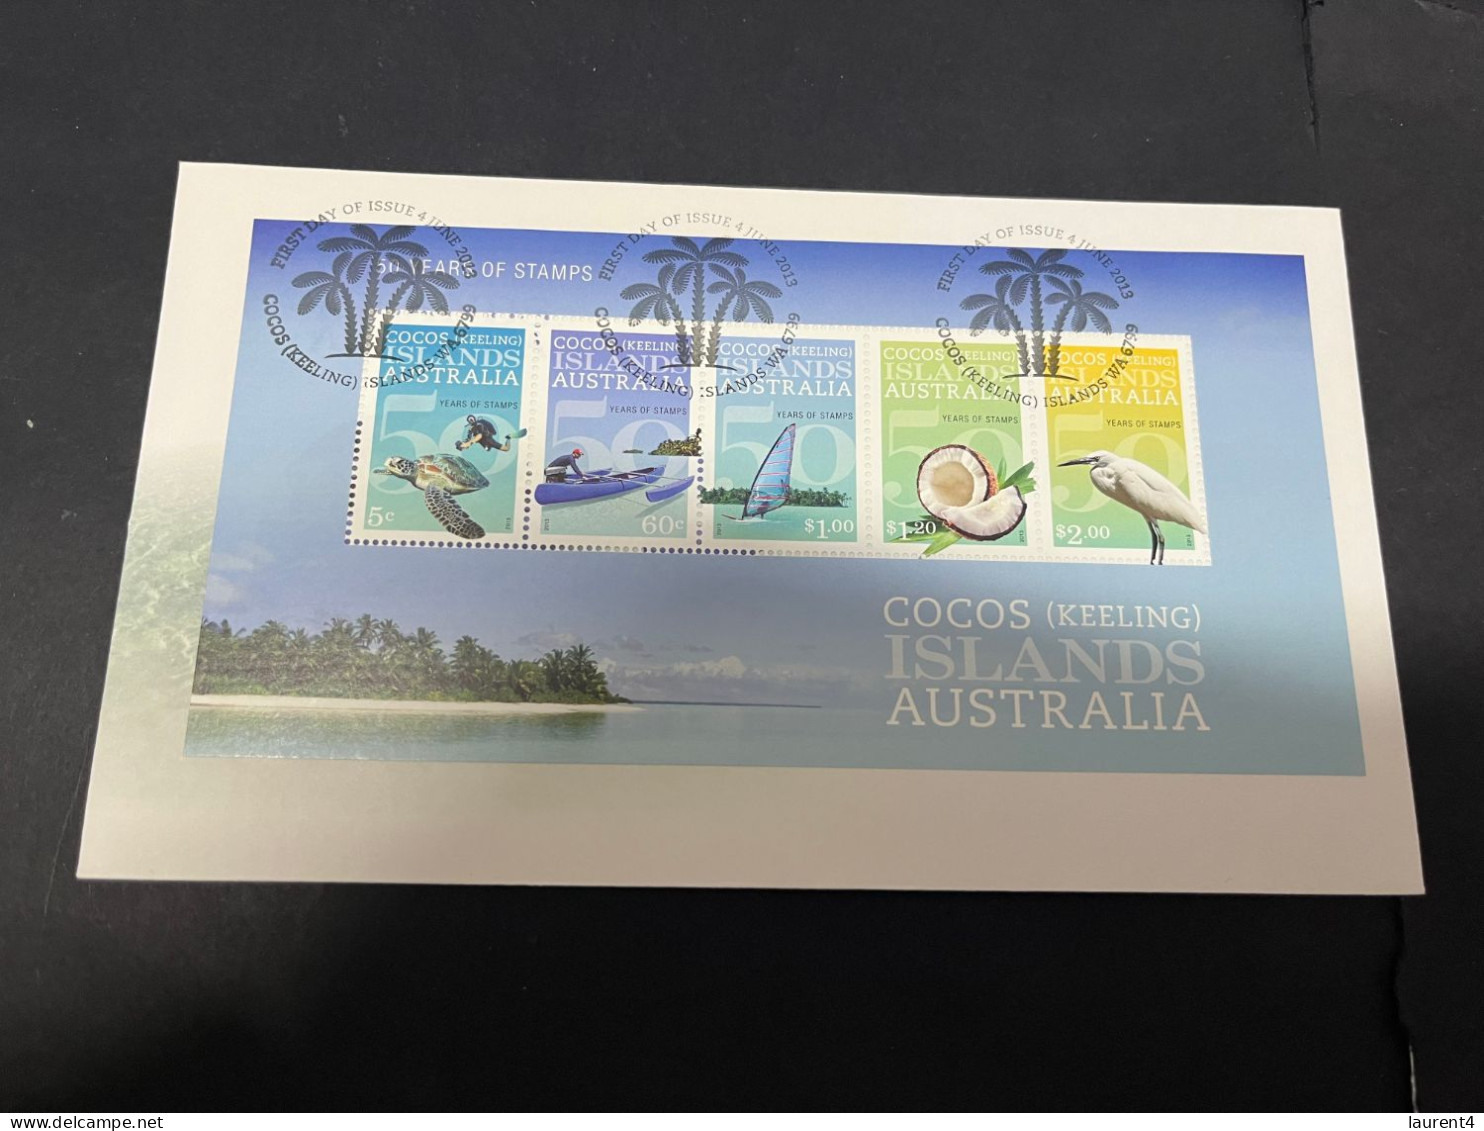 13-2-2024 (4 X 9) Australia - Cocos (Keeling) Islands FDC Cover (with Mini-sheet) 2019 - 50 Years Of Stamps - Cocos (Keeling) Islands